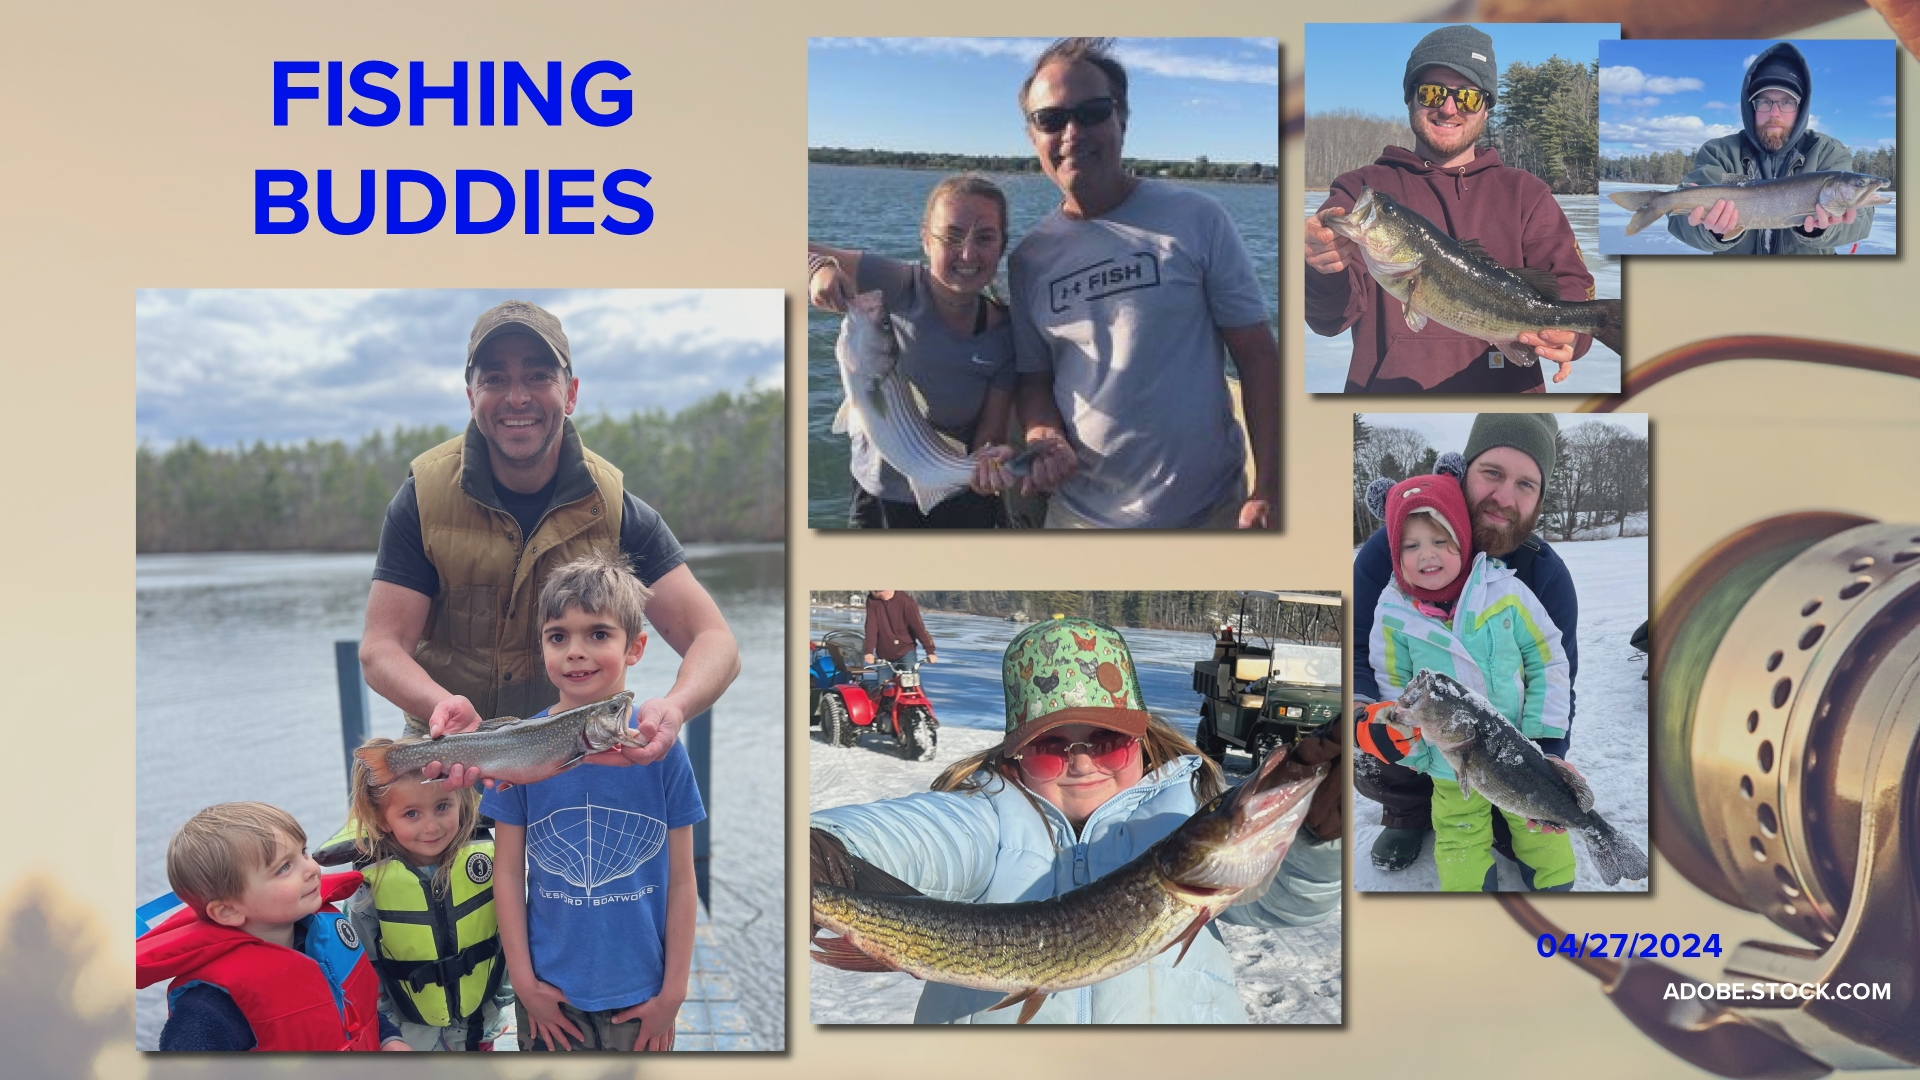 There's nothing like fishing with family.